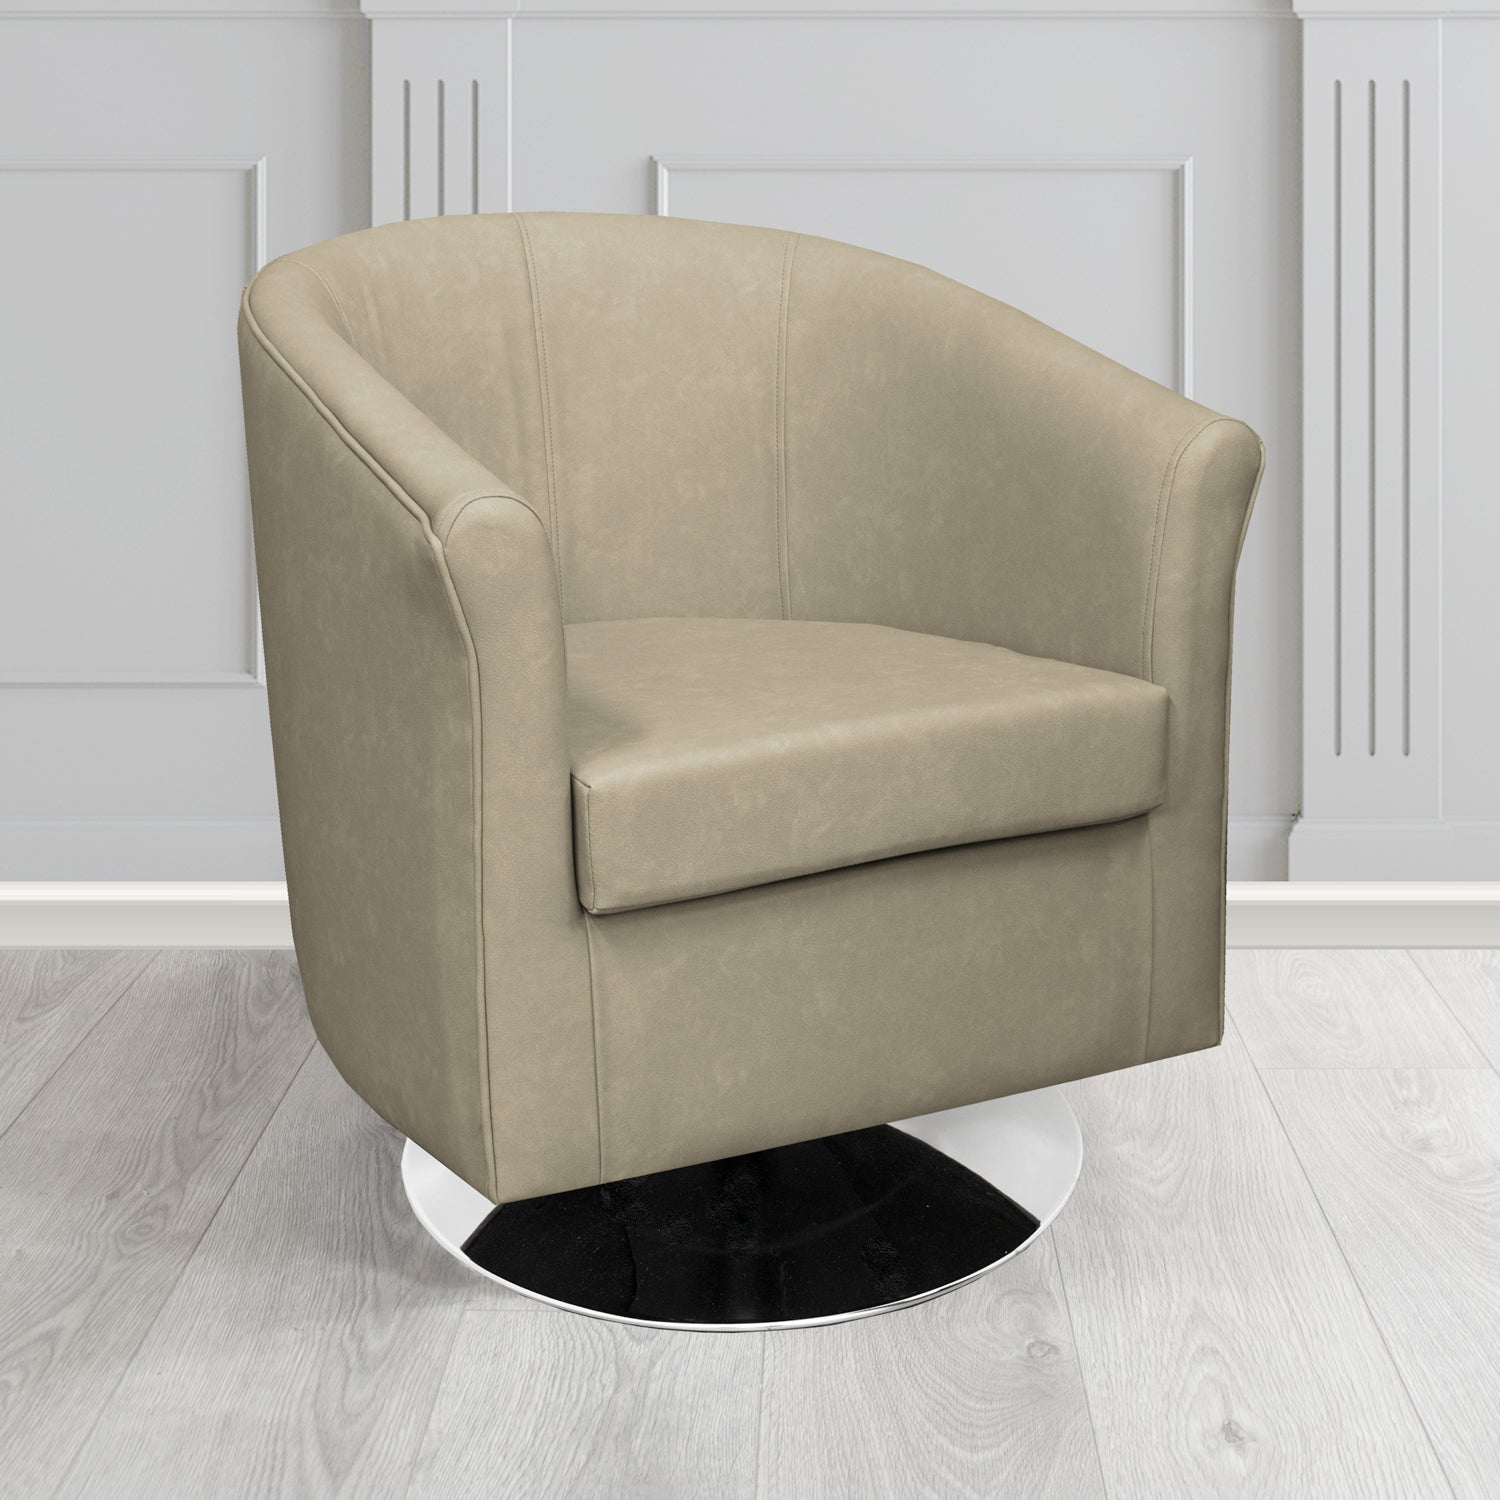 Tuscany Swivel Tub Chair in Infiniti Granite INF1845 Antimicrobial Crib 5 Faux Leather - The Tub Chair Shop